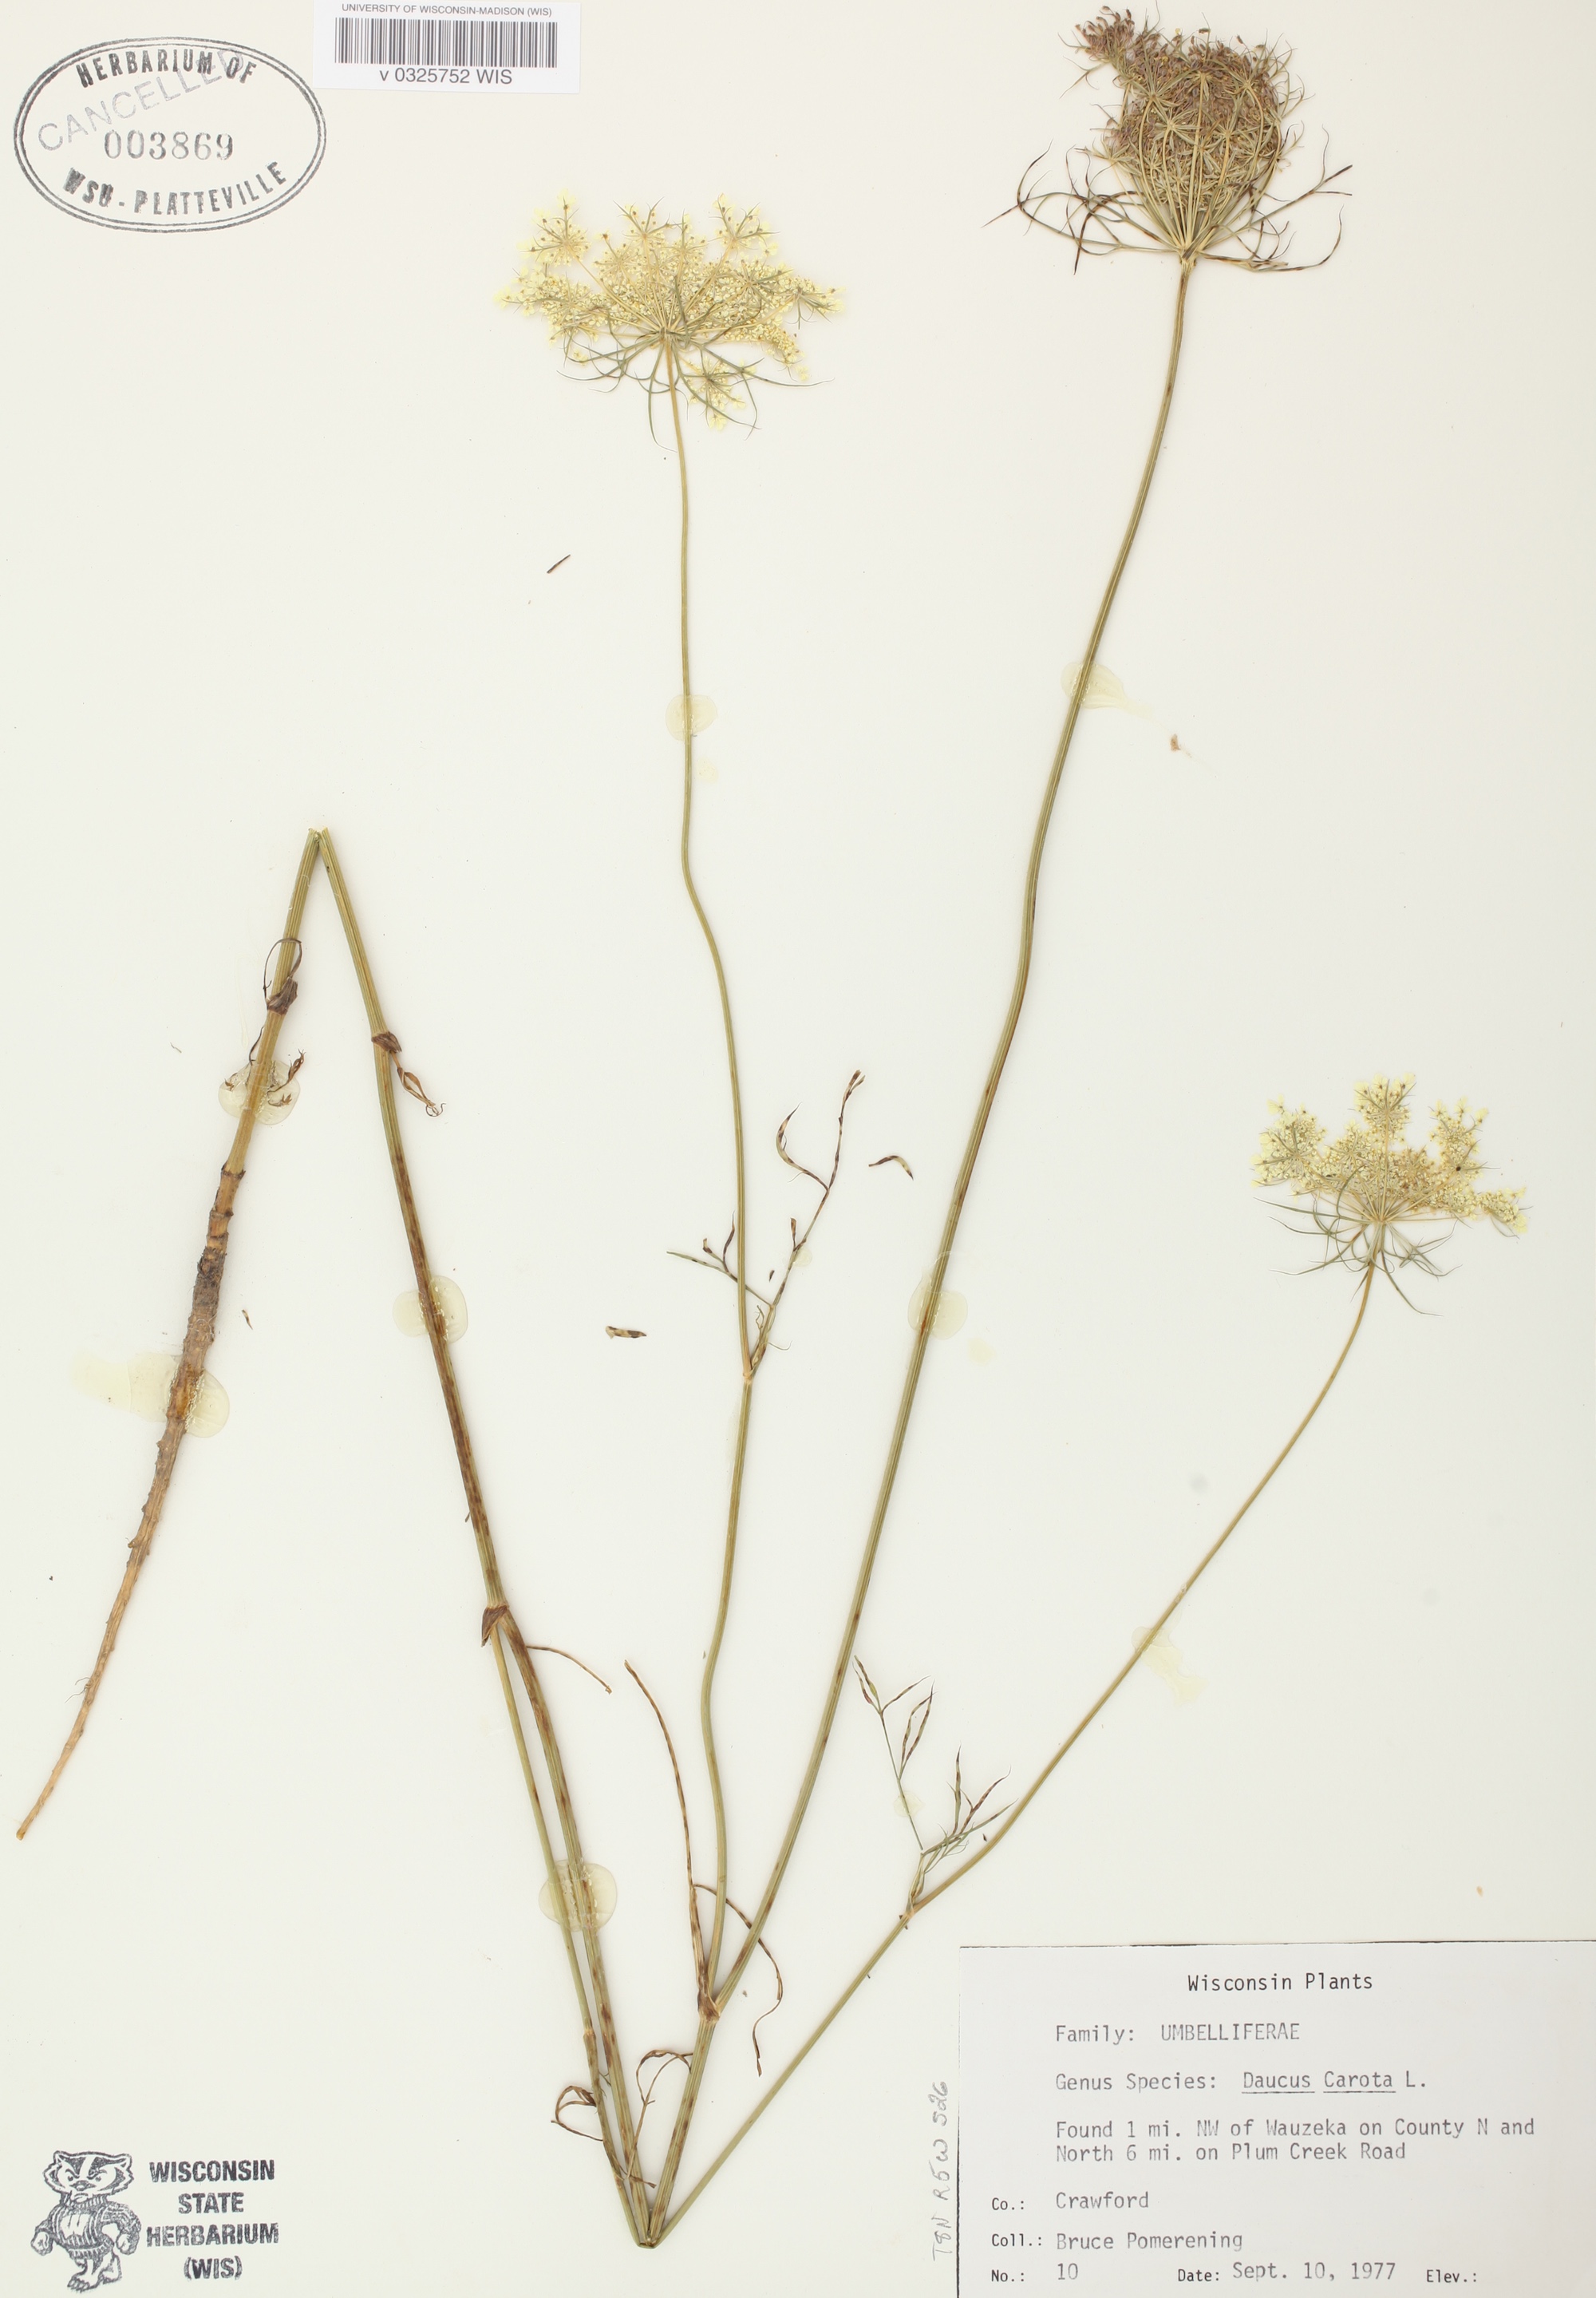  Queen Anne's Lace specimen collected in Wauzeka County on Plum Creek Road on September 10, 1977.